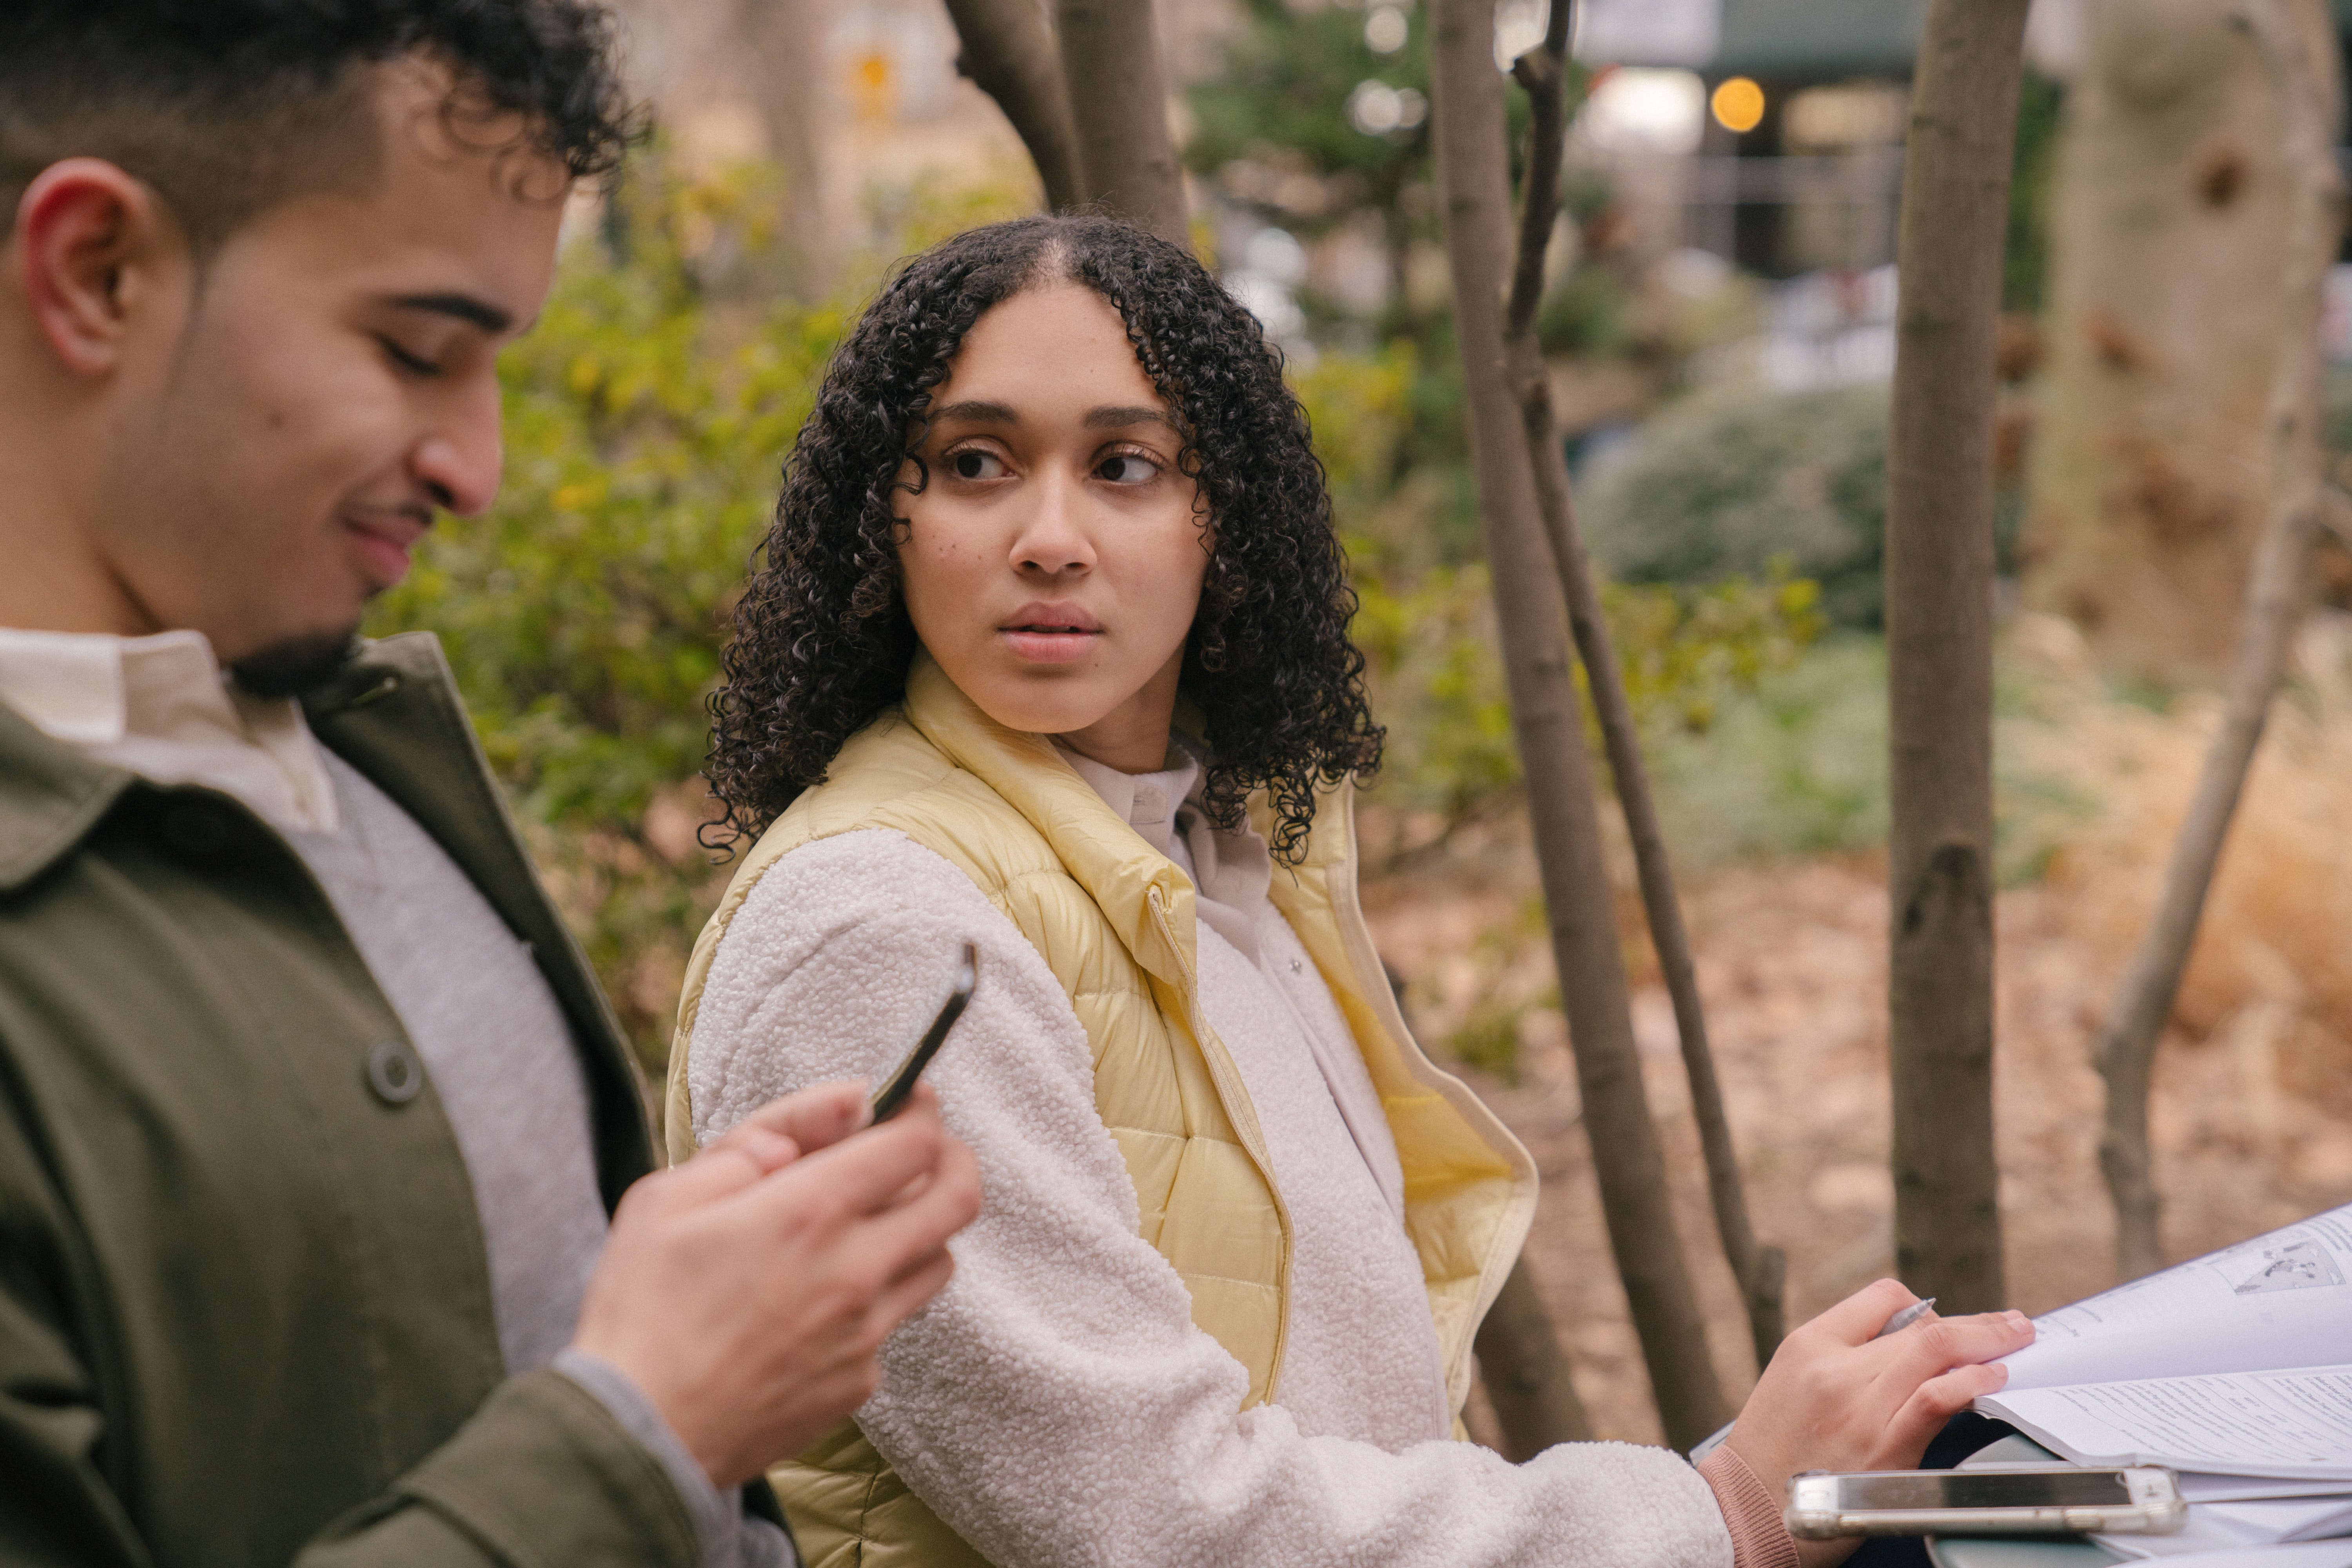 A woman looking at a man with a concerned face while he is texting. | Source: Pexels